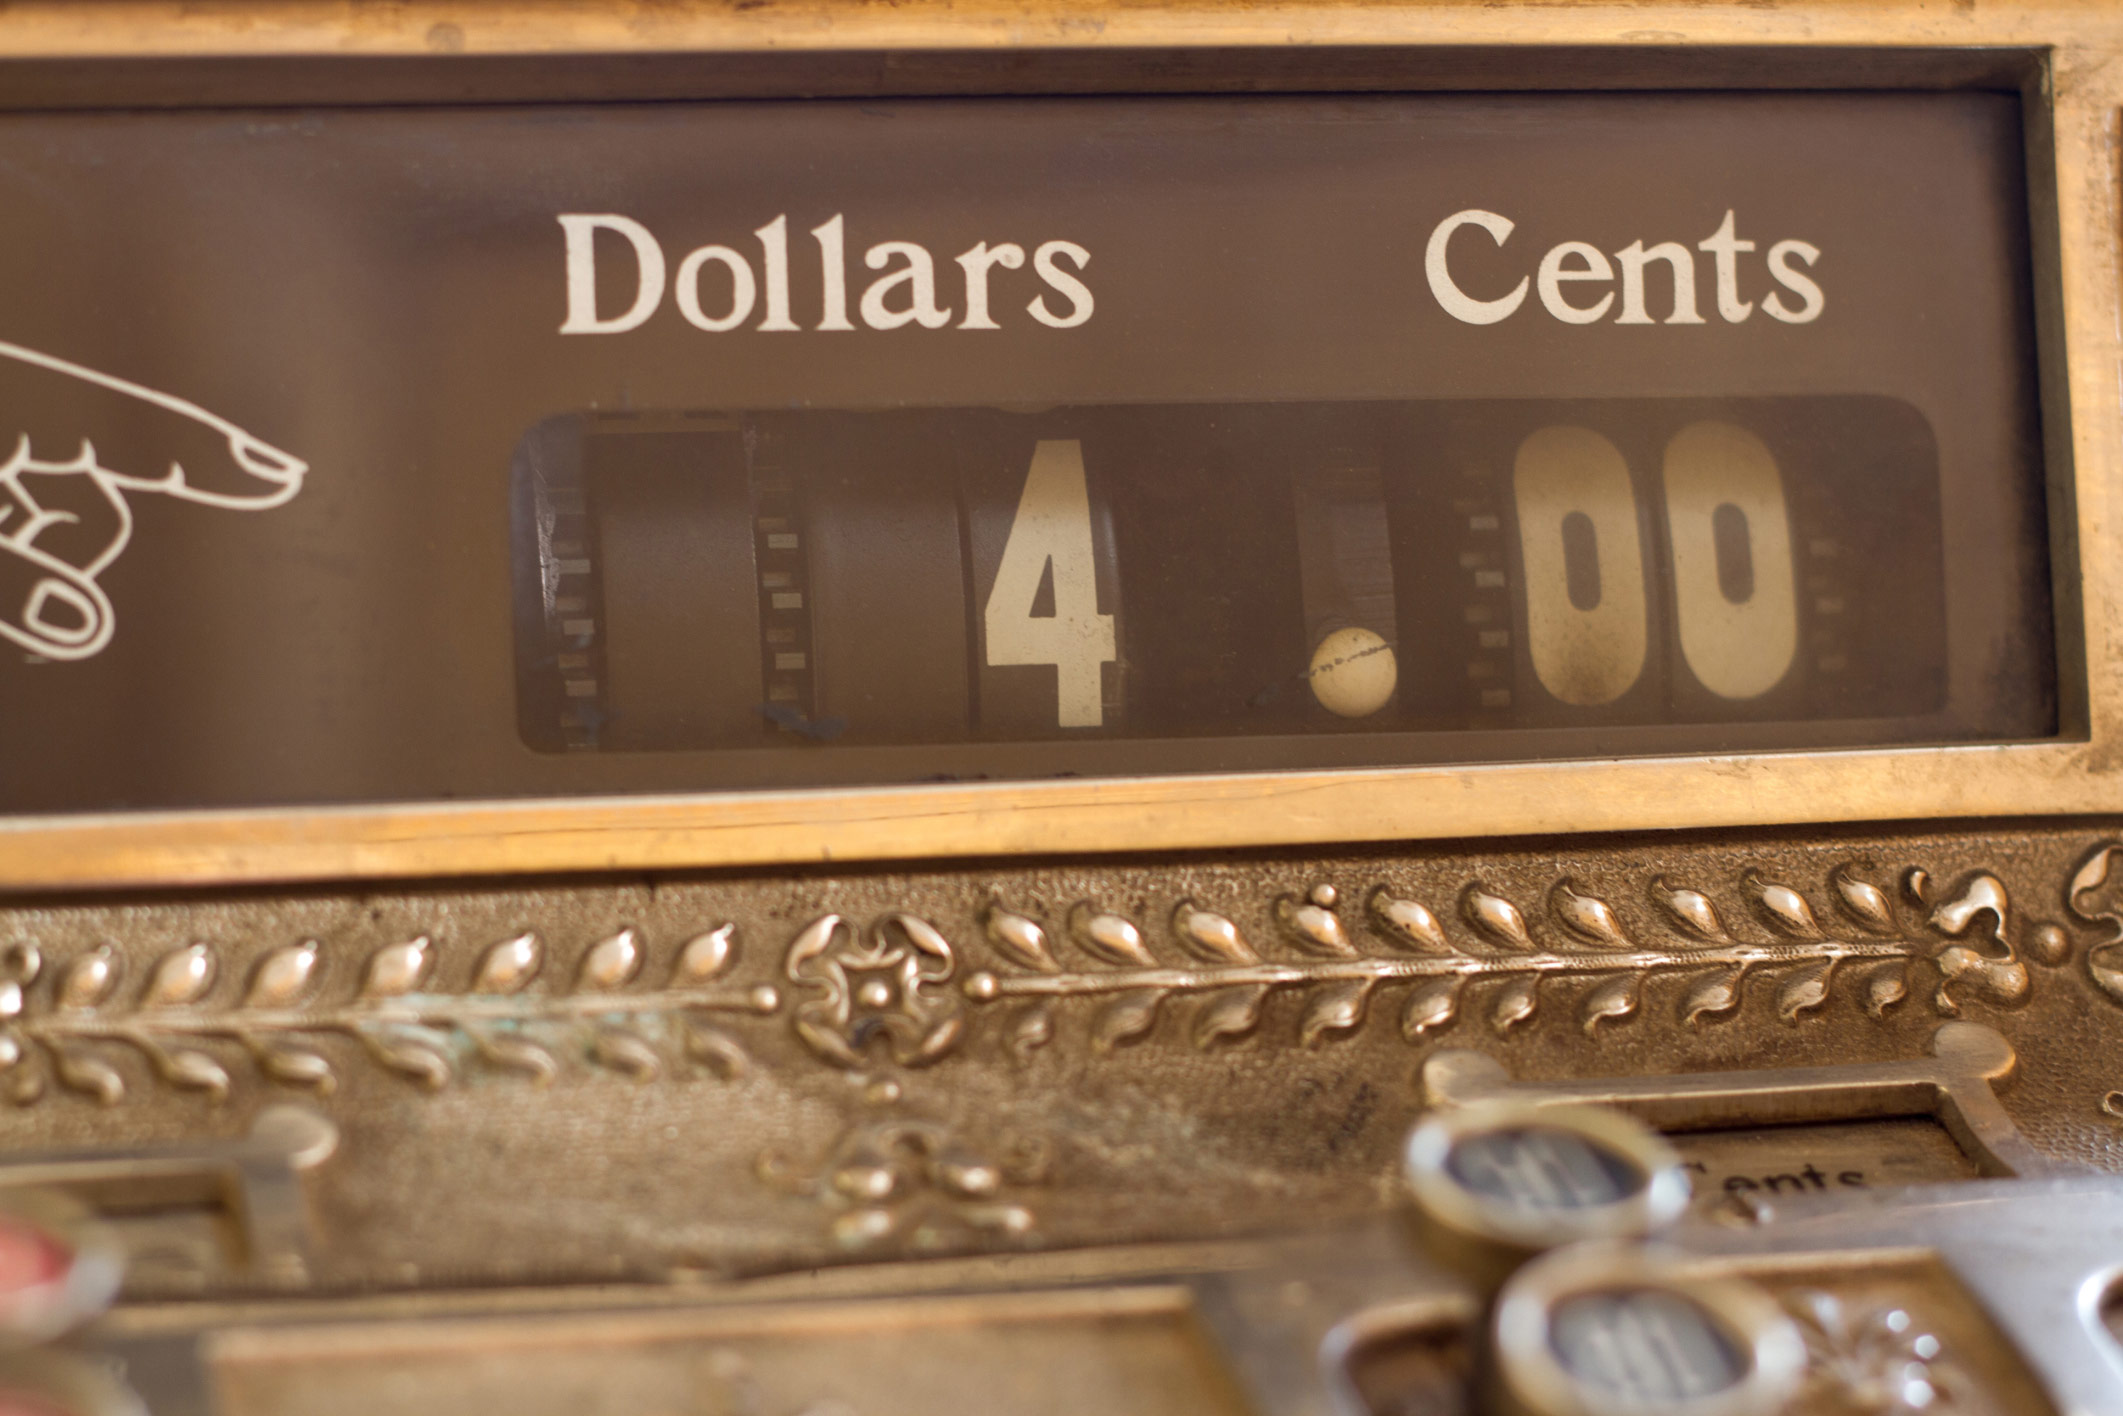 An image of a cash register showing $4.00